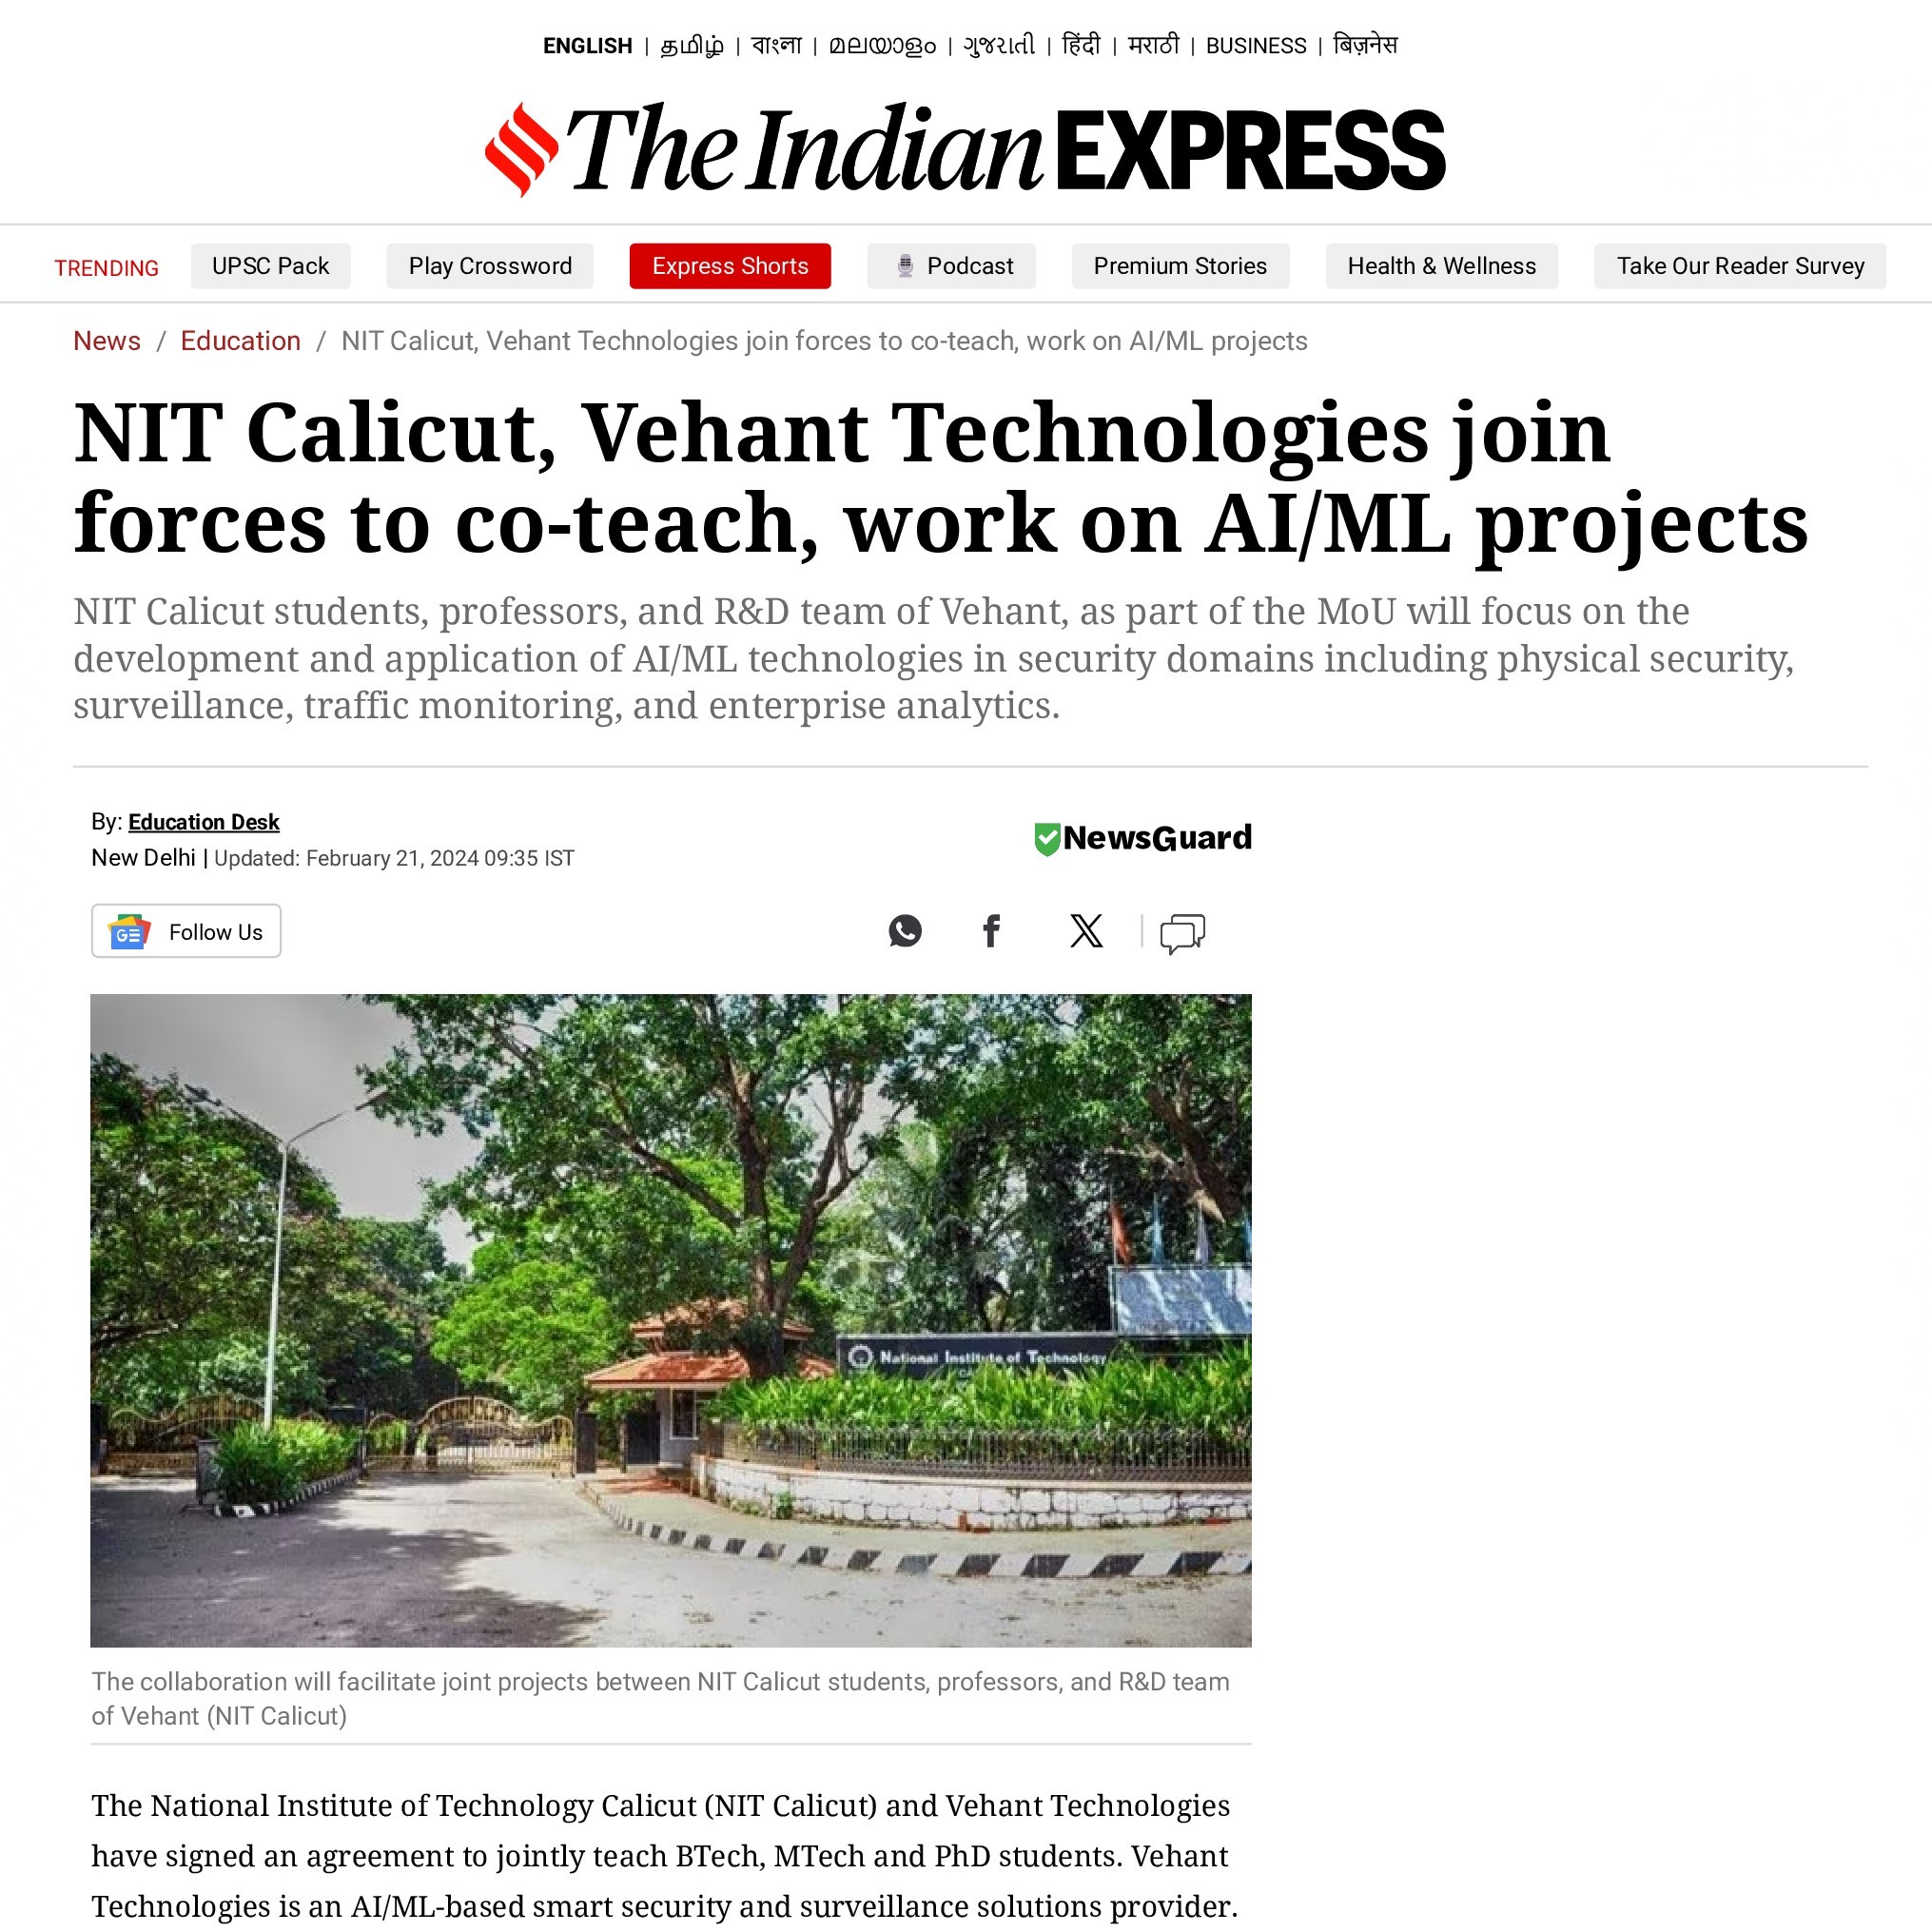 NIT Calicut, Vehant Technologies join forces to co-teach, work on AI/ML projects